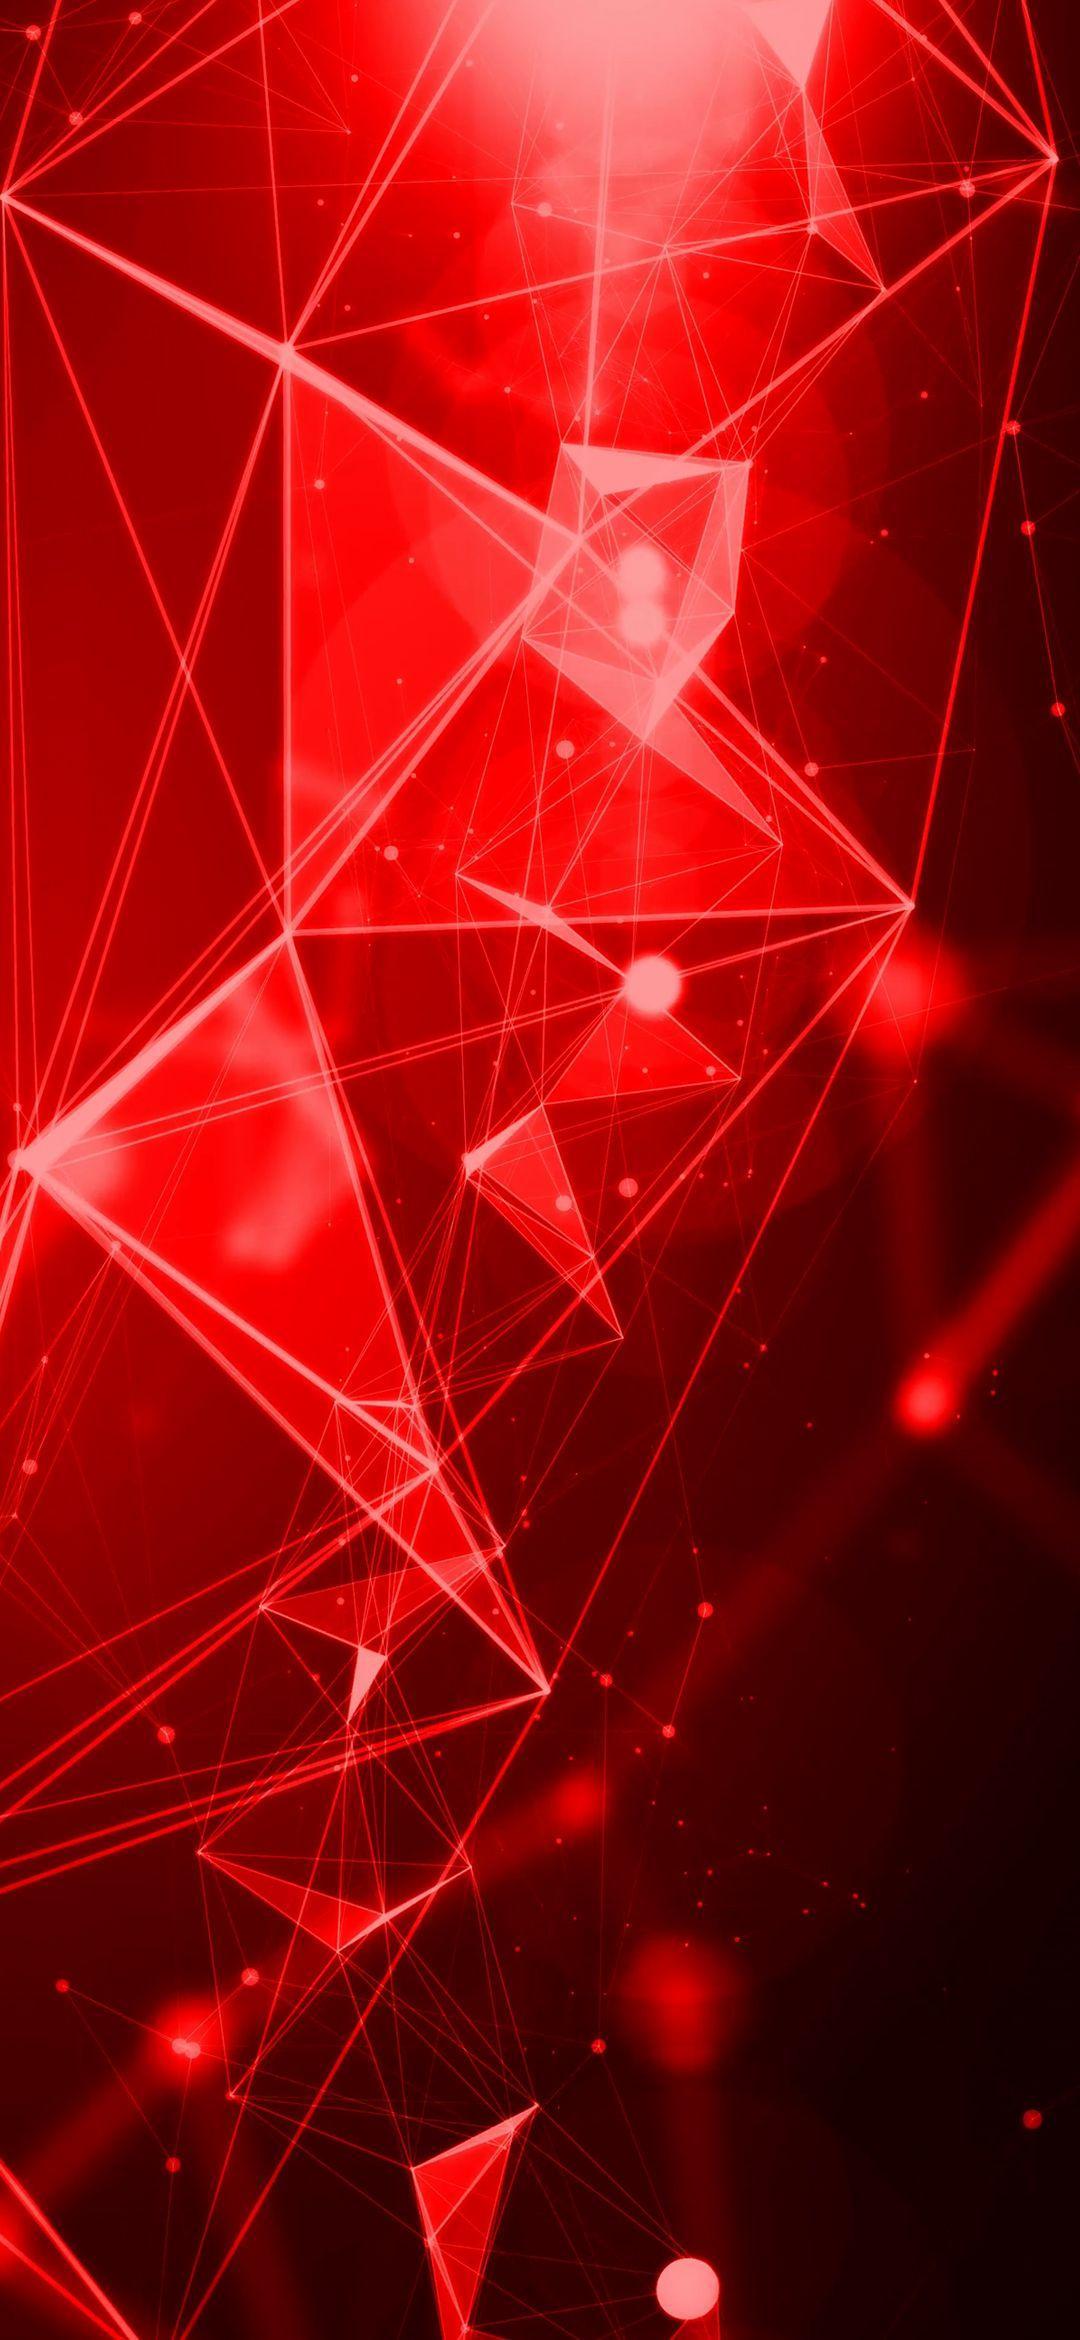 Oppo Find X Background with Abstract 3D Infra Red Lights. HD